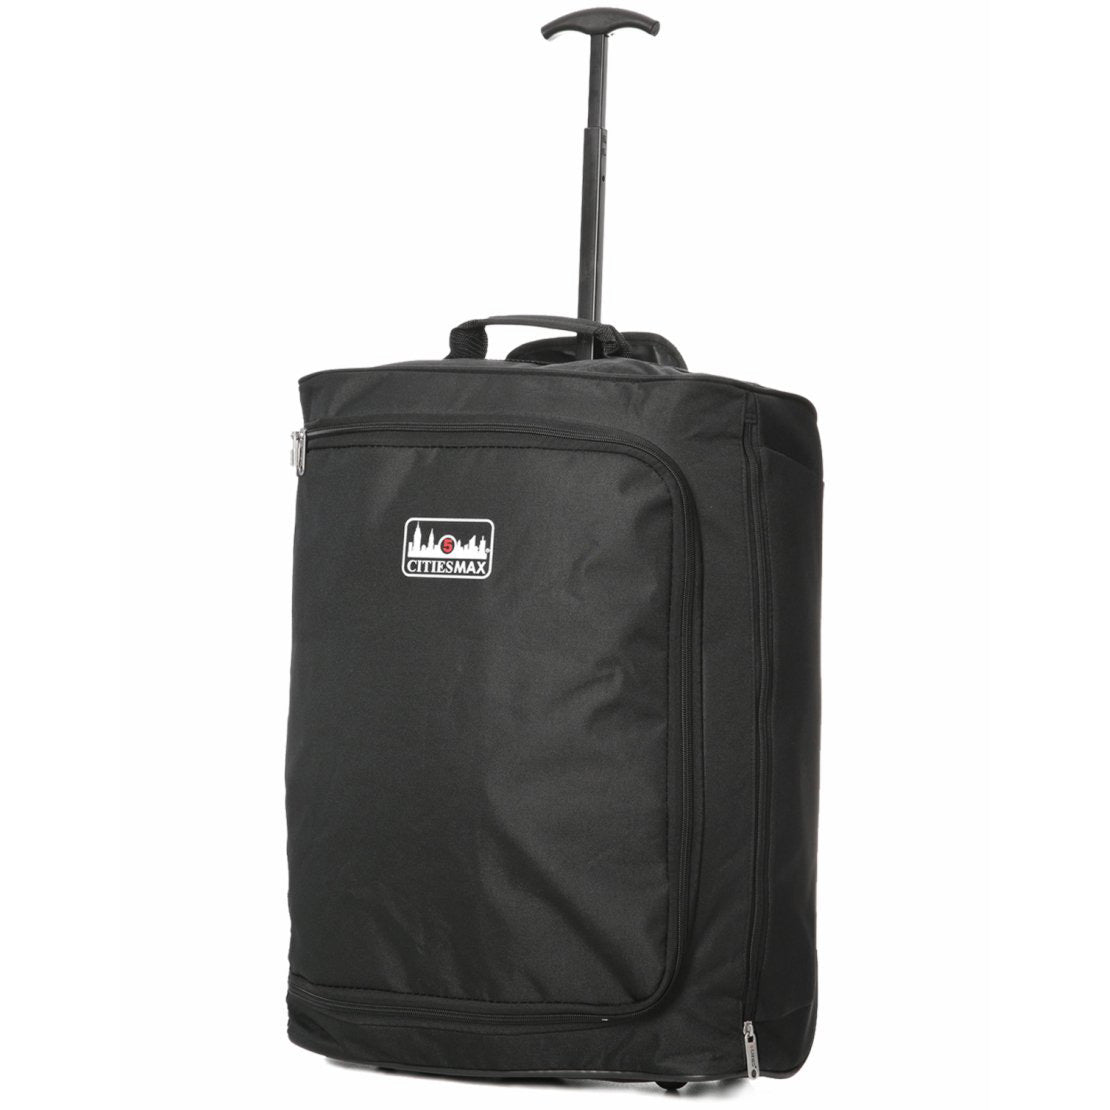 5 Cities (55x40x20cm) Lightweight Cabin Hand Luggage and (40x20x25cm) Holdall Flight Bag